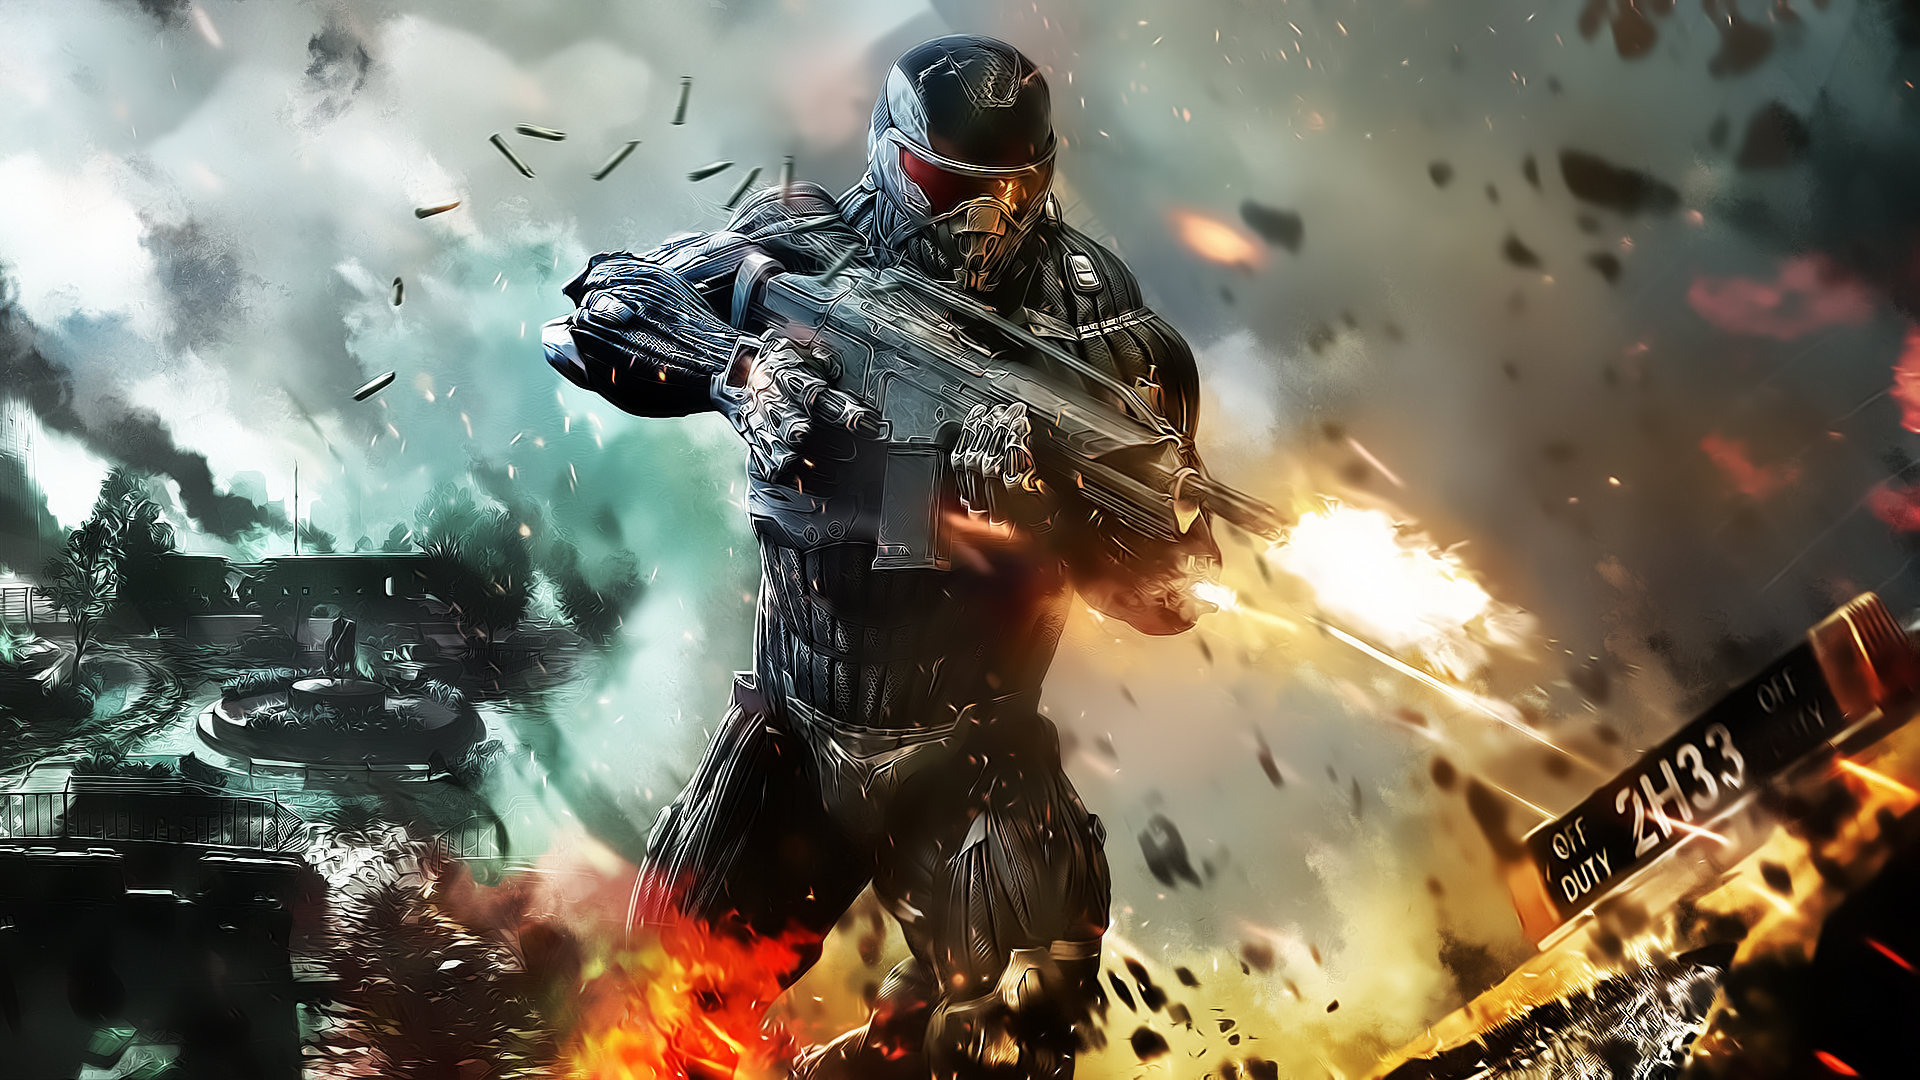 crysis hd wallpapers,action adventure game,shooter game,pc game,movie,games